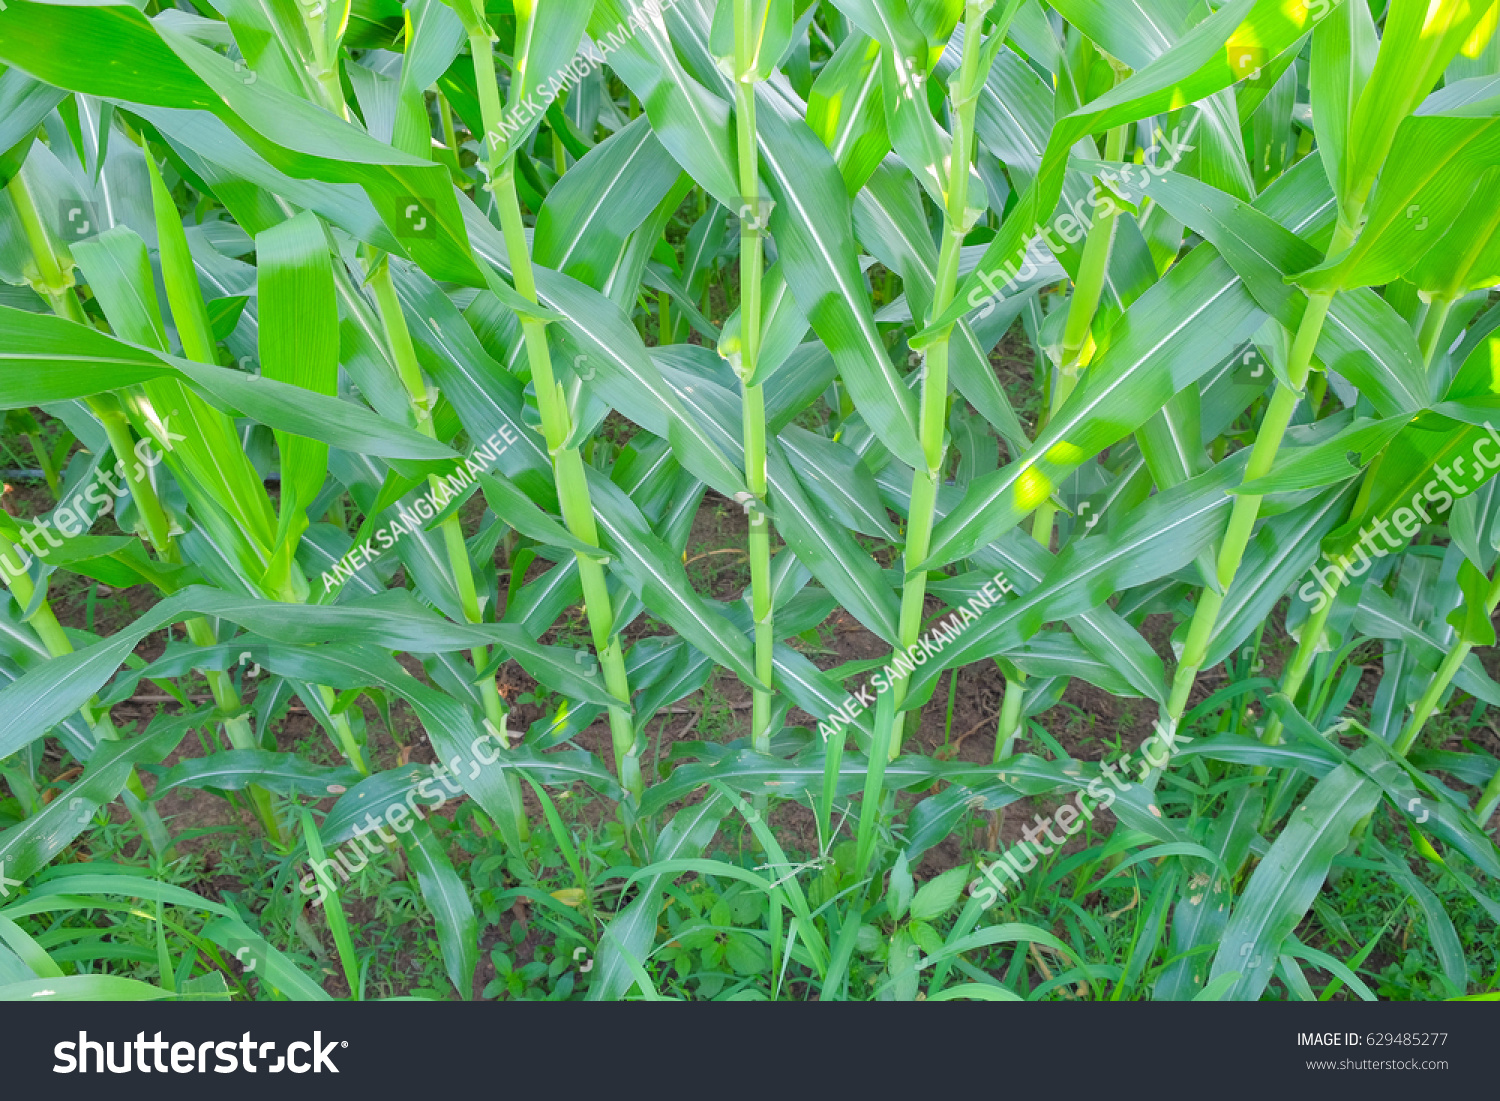 selective focus picture of organic young corn at agriculture field  #629485277